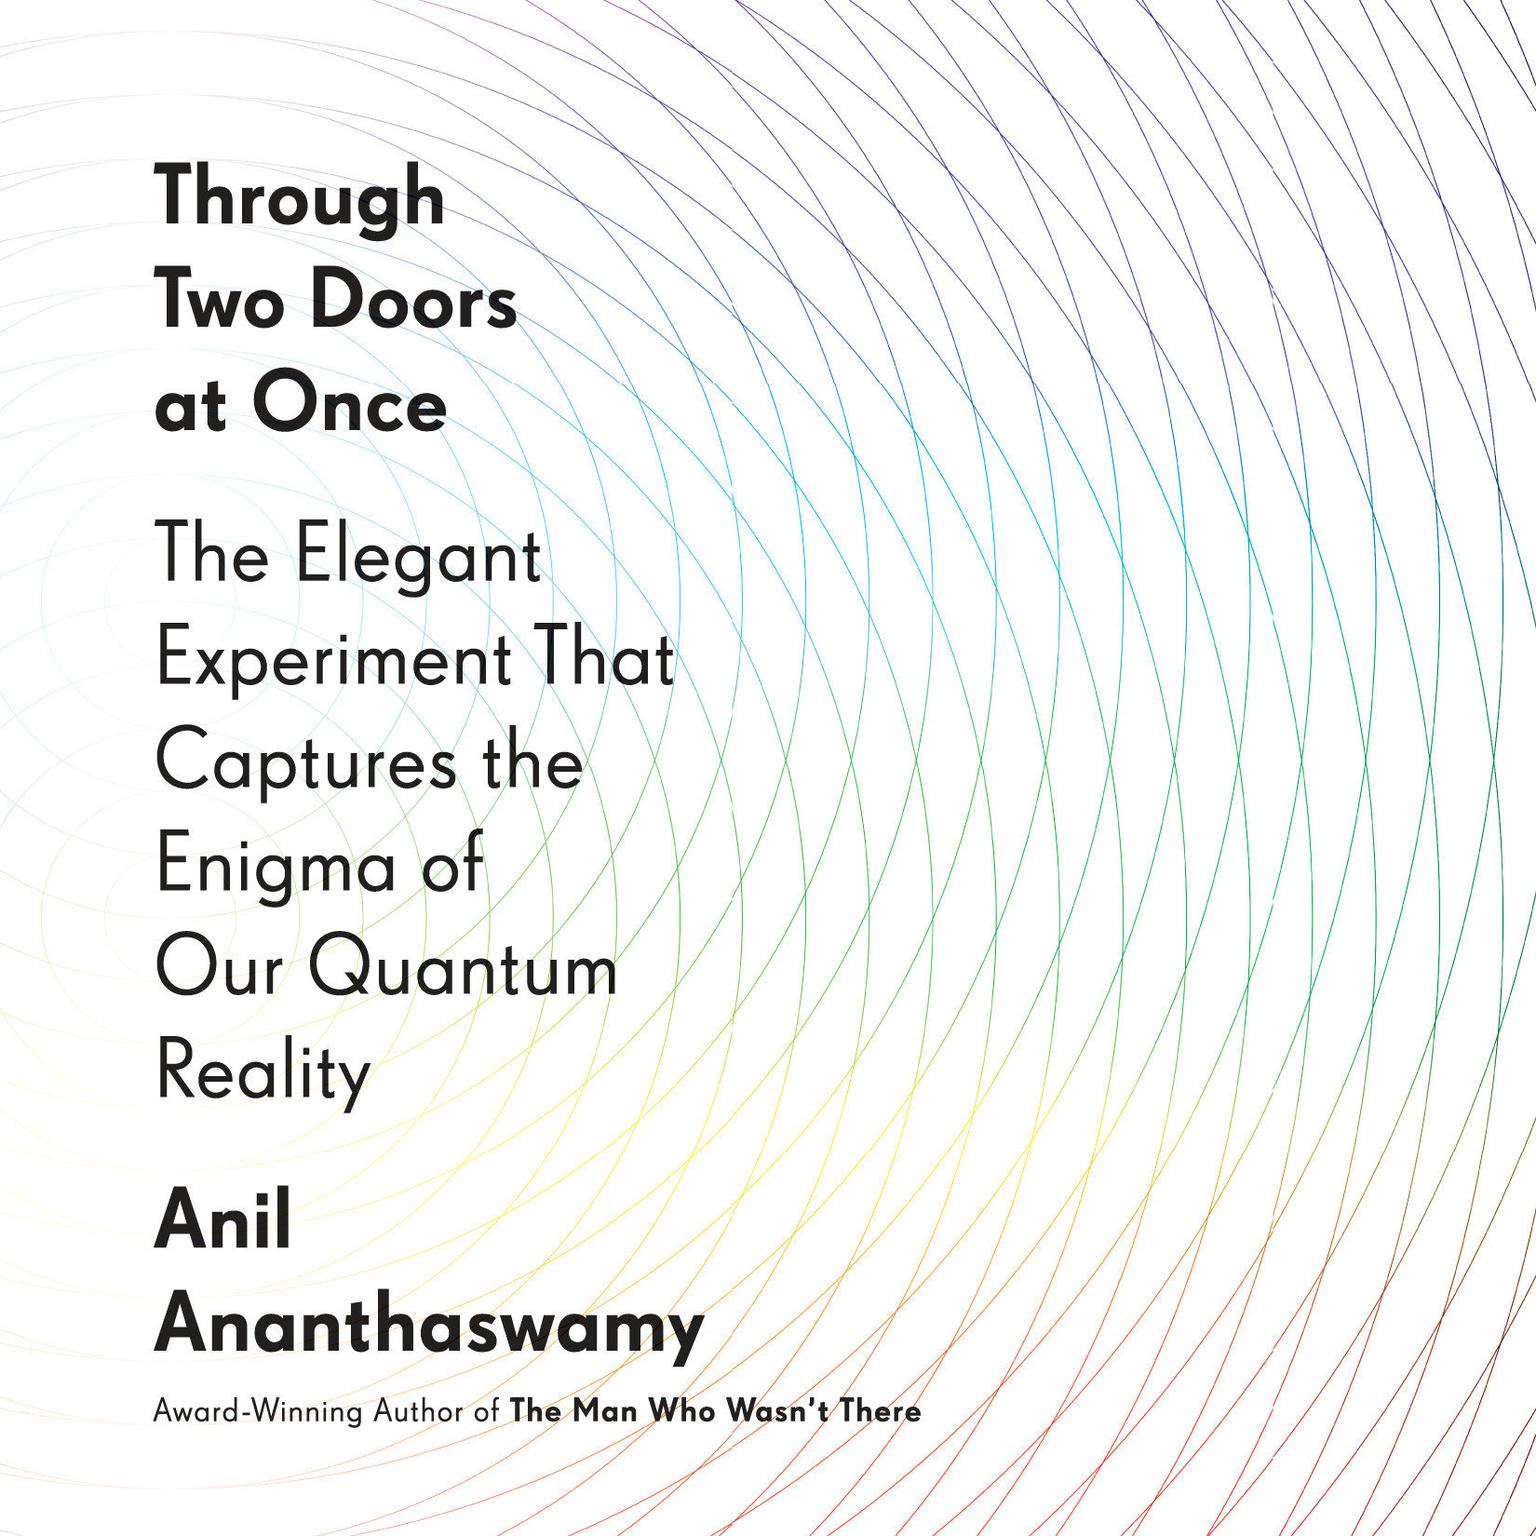 Through Two Doors at Once: The Elegant Experiment That Captures the Enigma of Our Quantum Reality Audiobook, by Anil Ananthaswamy